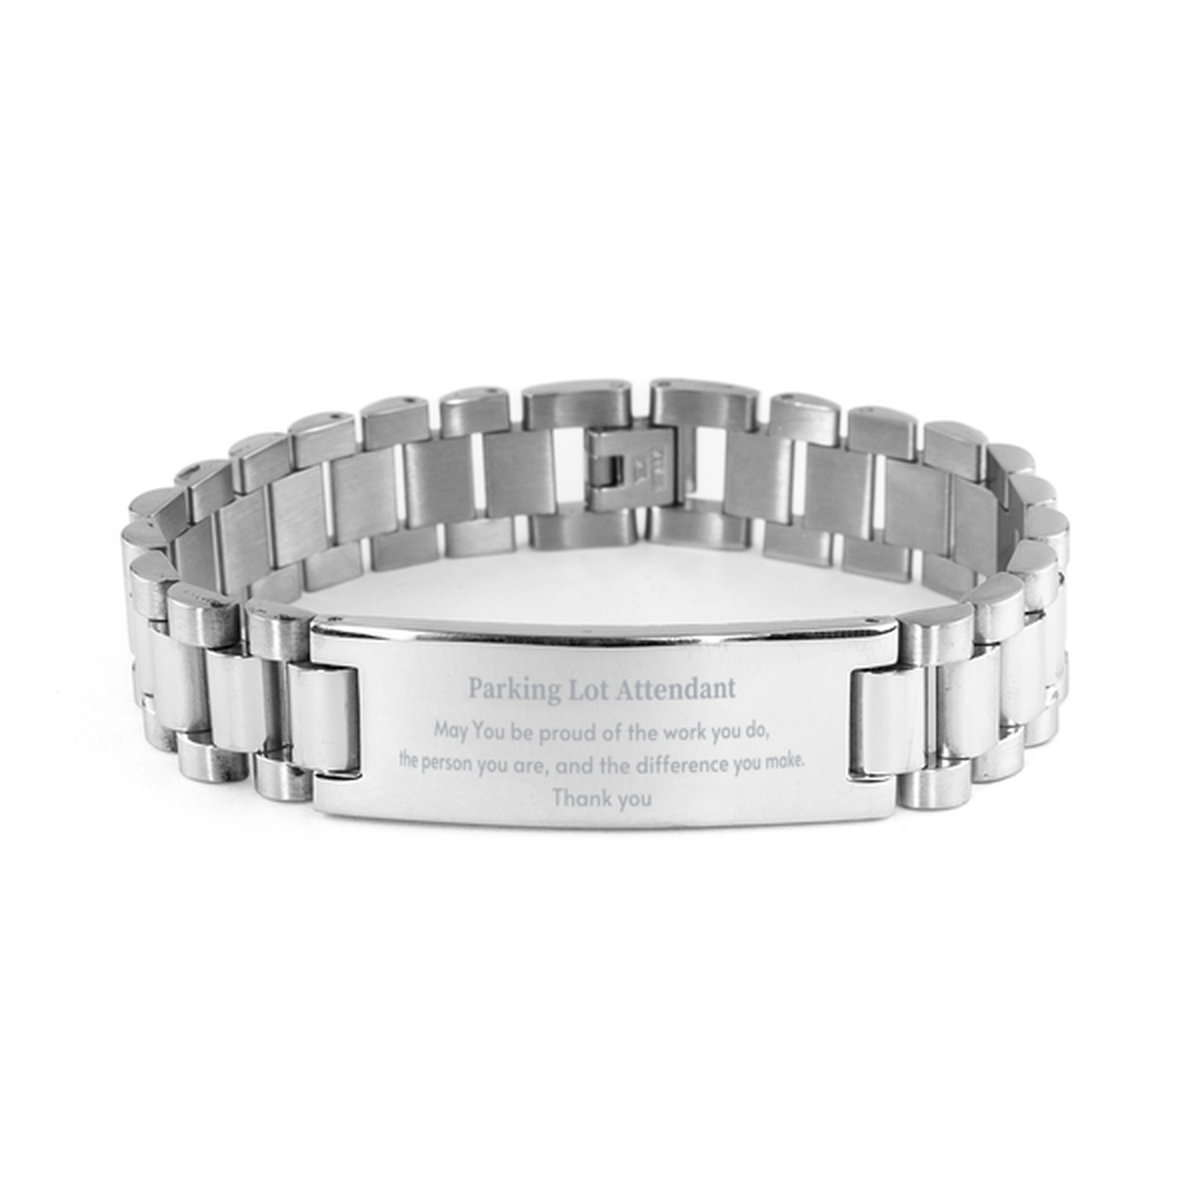 Heartwarming Ladder Stainless Steel Bracelet Retirement Coworkers Gifts for Parking Lot Attendant, Parking Lot Attendant May You be proud of the work you do, the person you are Gifts for Boss Men Women Friends